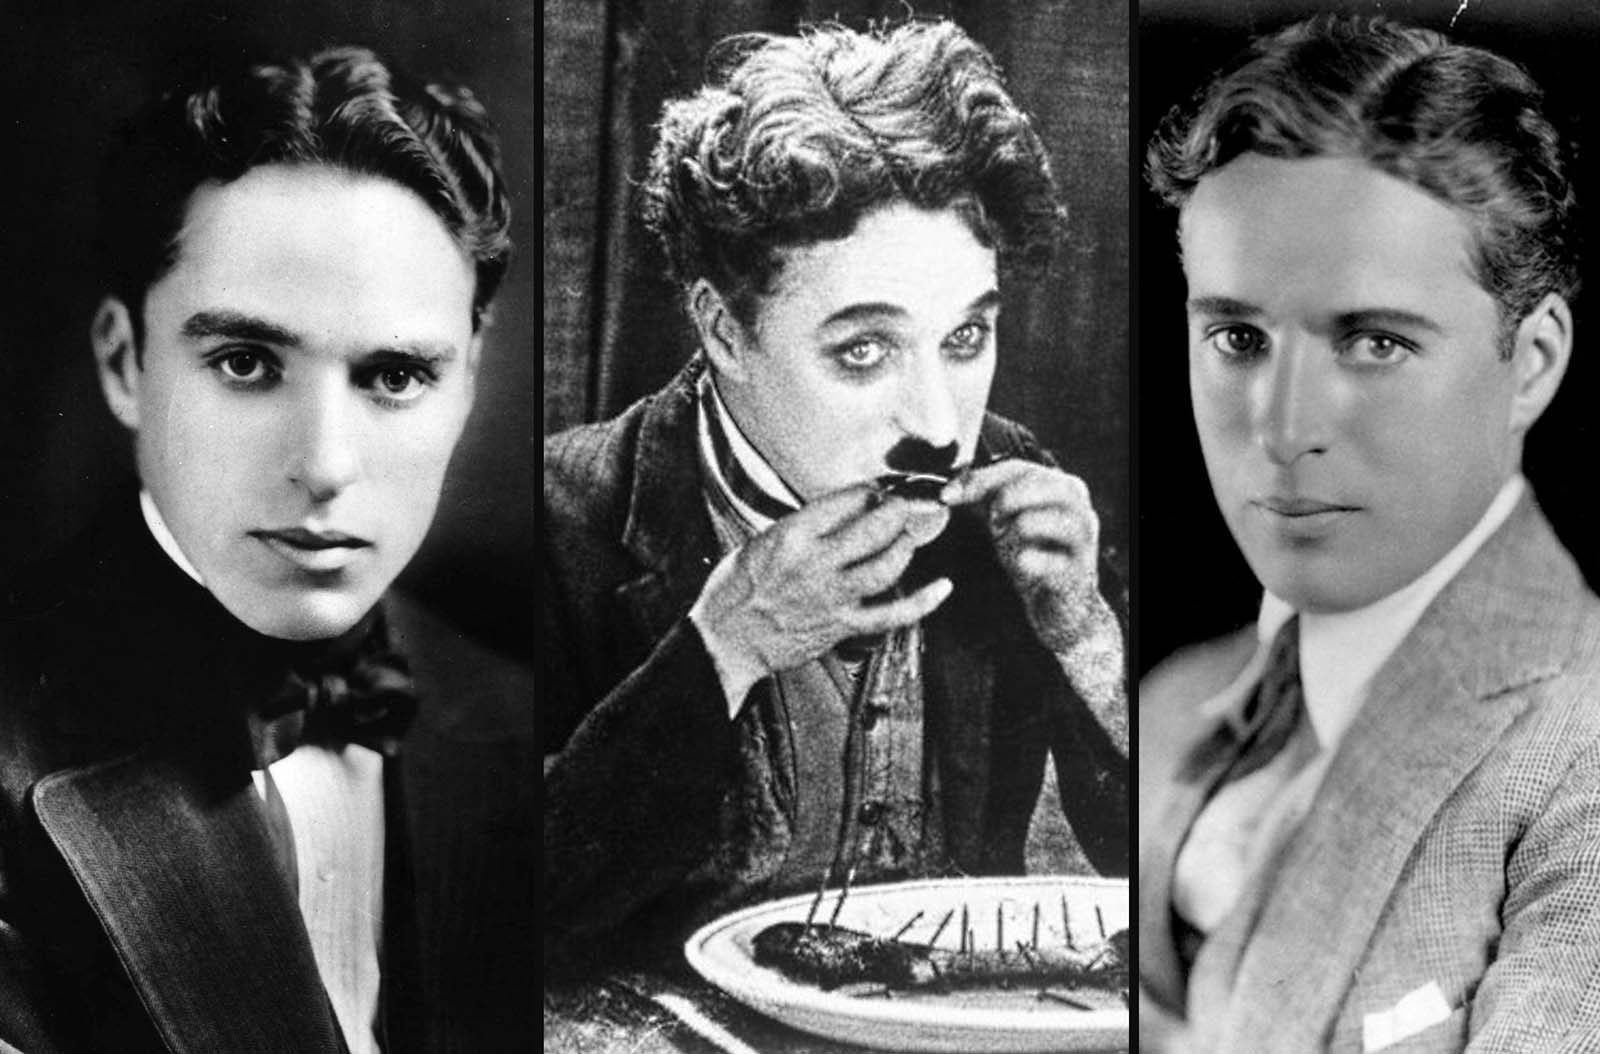 Fascinating Old Photos of a Young Charlie Chaplin Without His Iconic Mustache and Hat